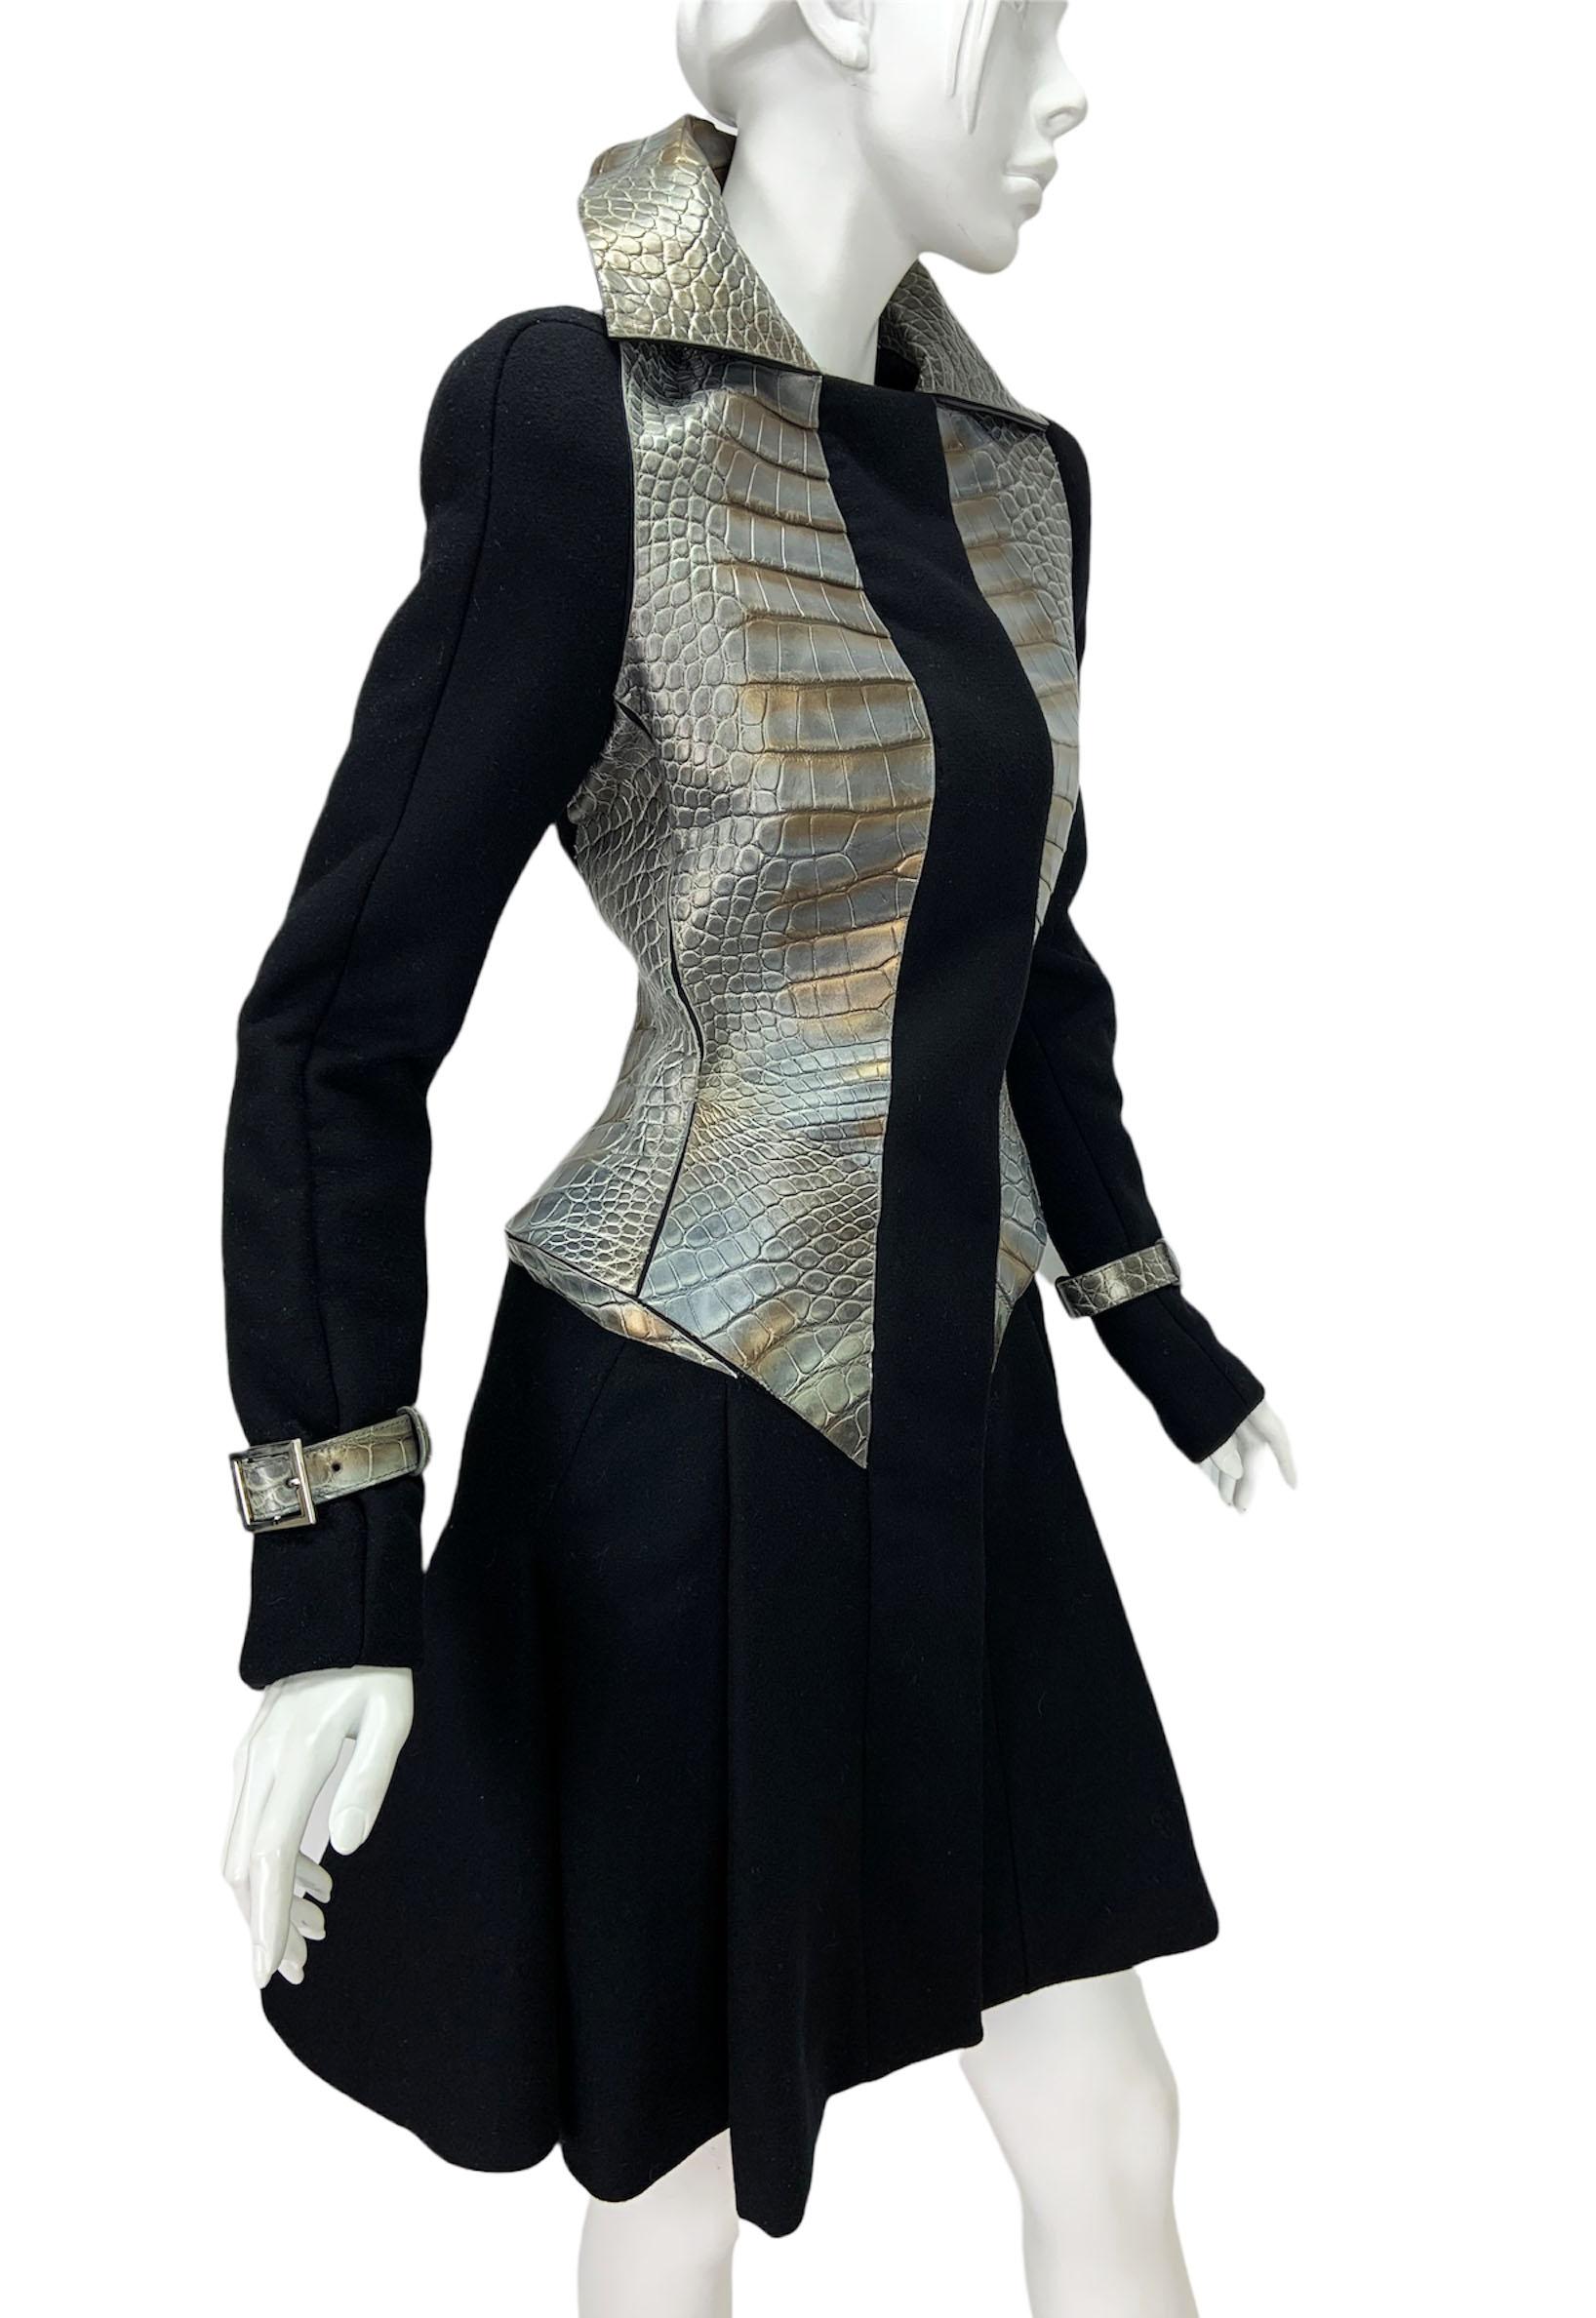 New Versace Wool Leather Fitted Coat
F/W 2012 Collection
Designer size 38 - US 2/4 ( please check measurements).
Black Wool, Crocodile Pattern Leather, Flared Skirt, Adjustable Straps on Sleeves, Padded Shoulders.
Silver Tone Hardware, Fully Lined,